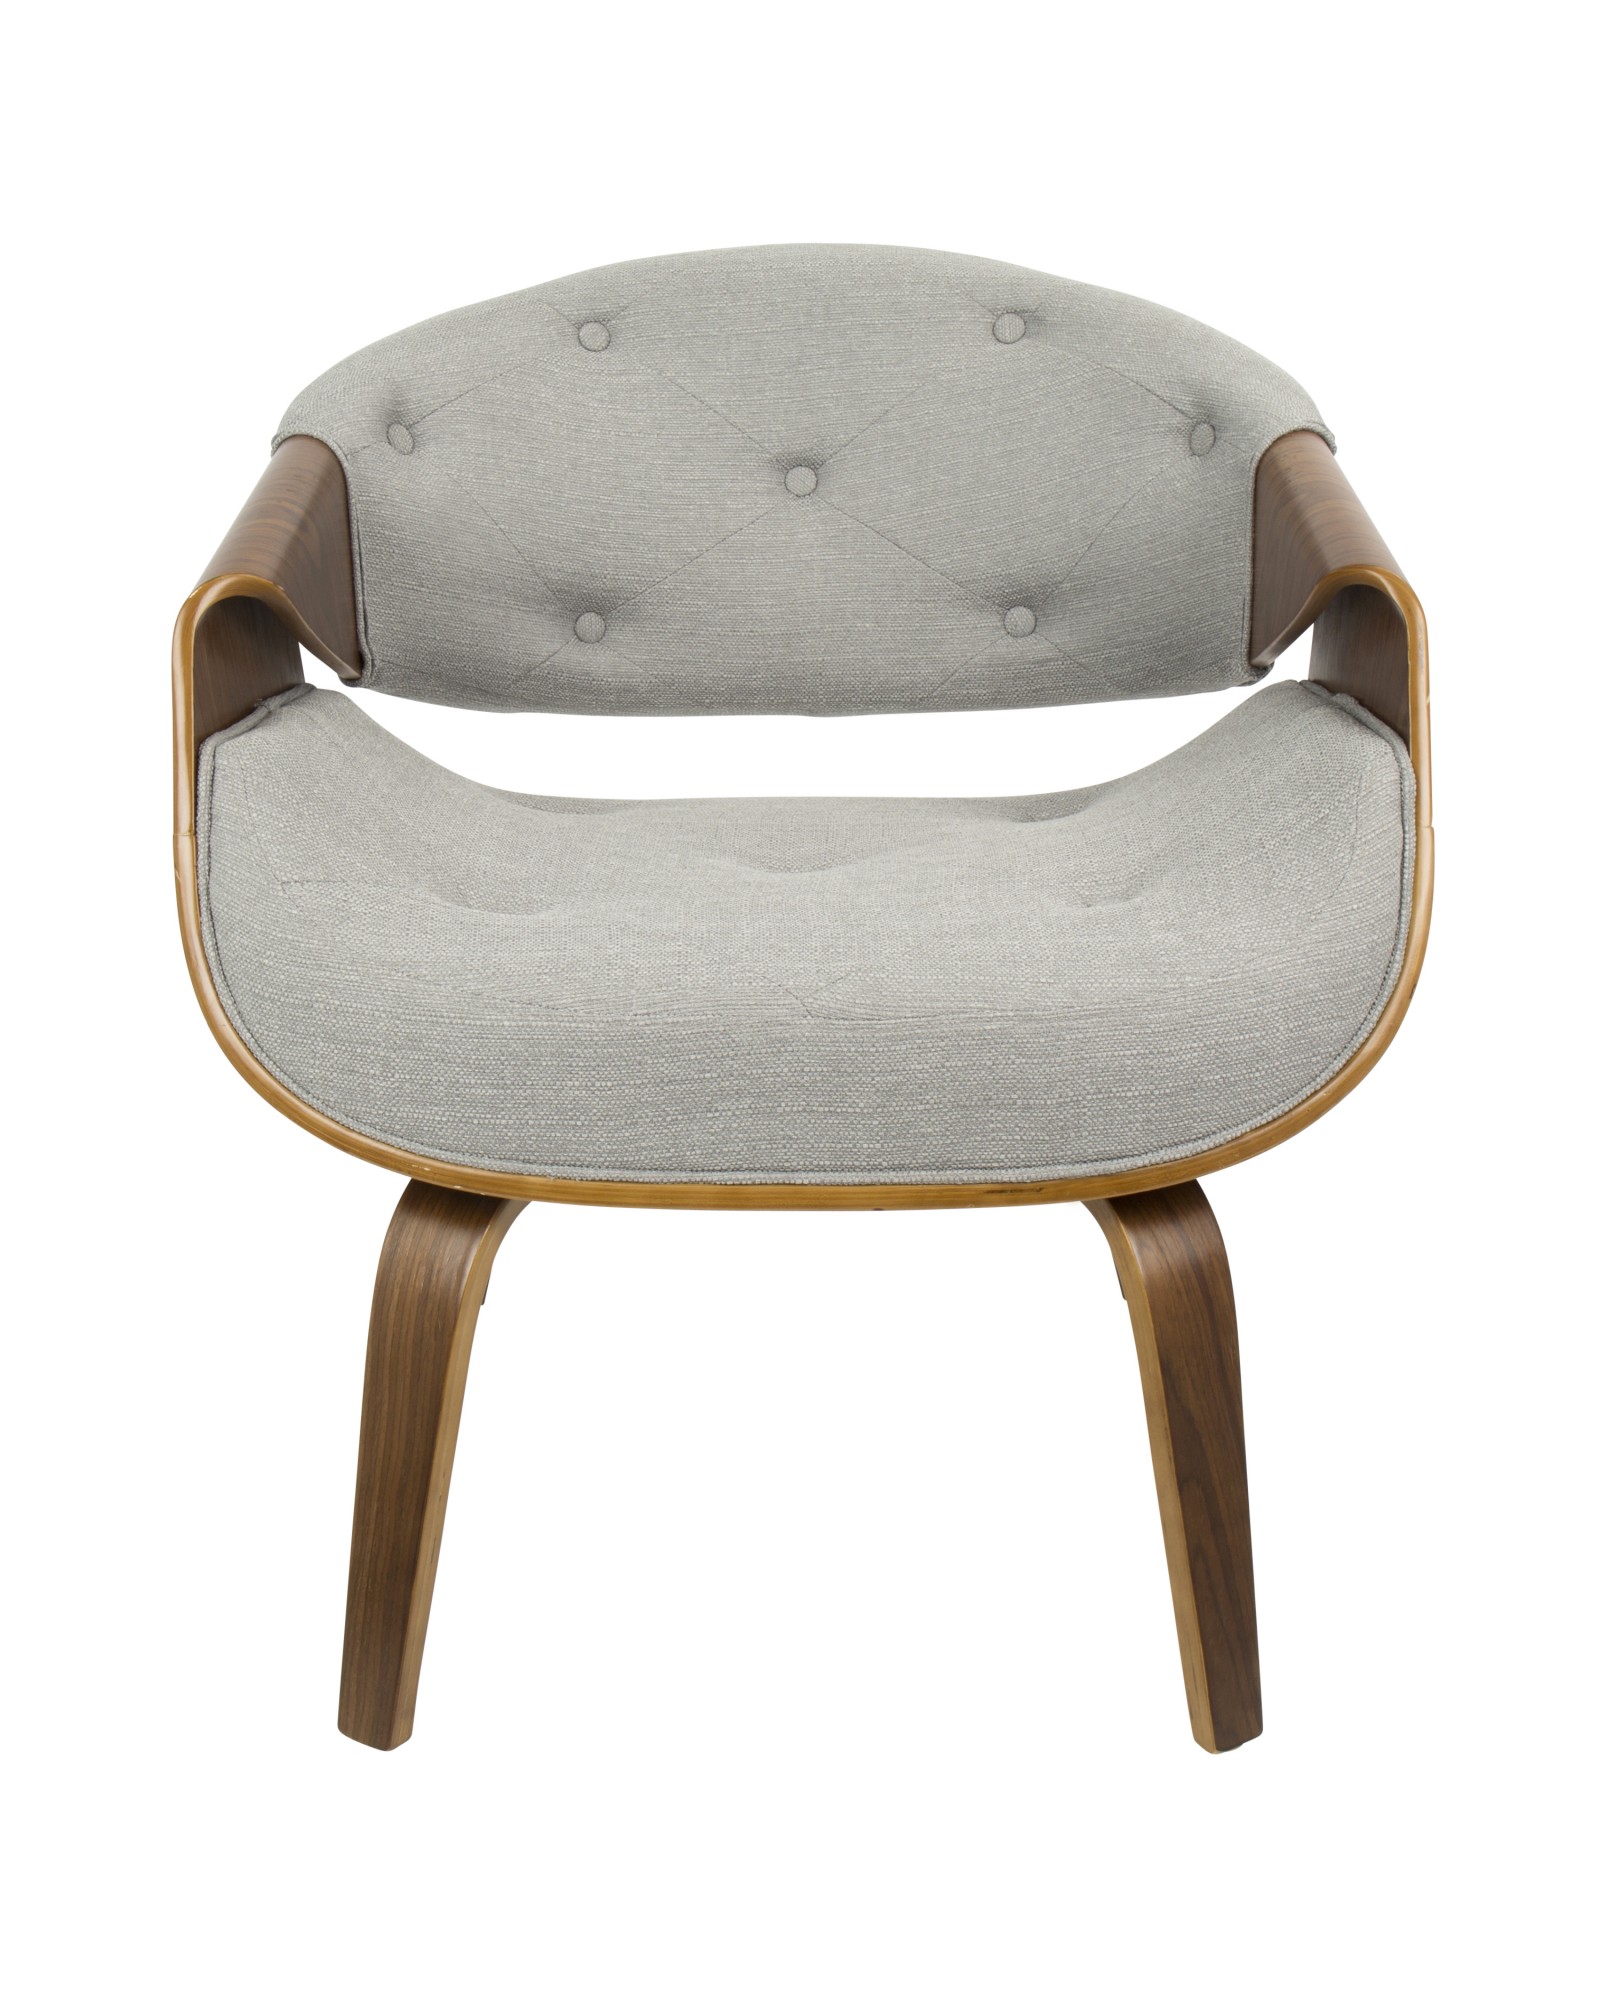 Curvo Mid-Century Modern Tufted Accent Chair in Walnut and Grey Fabric